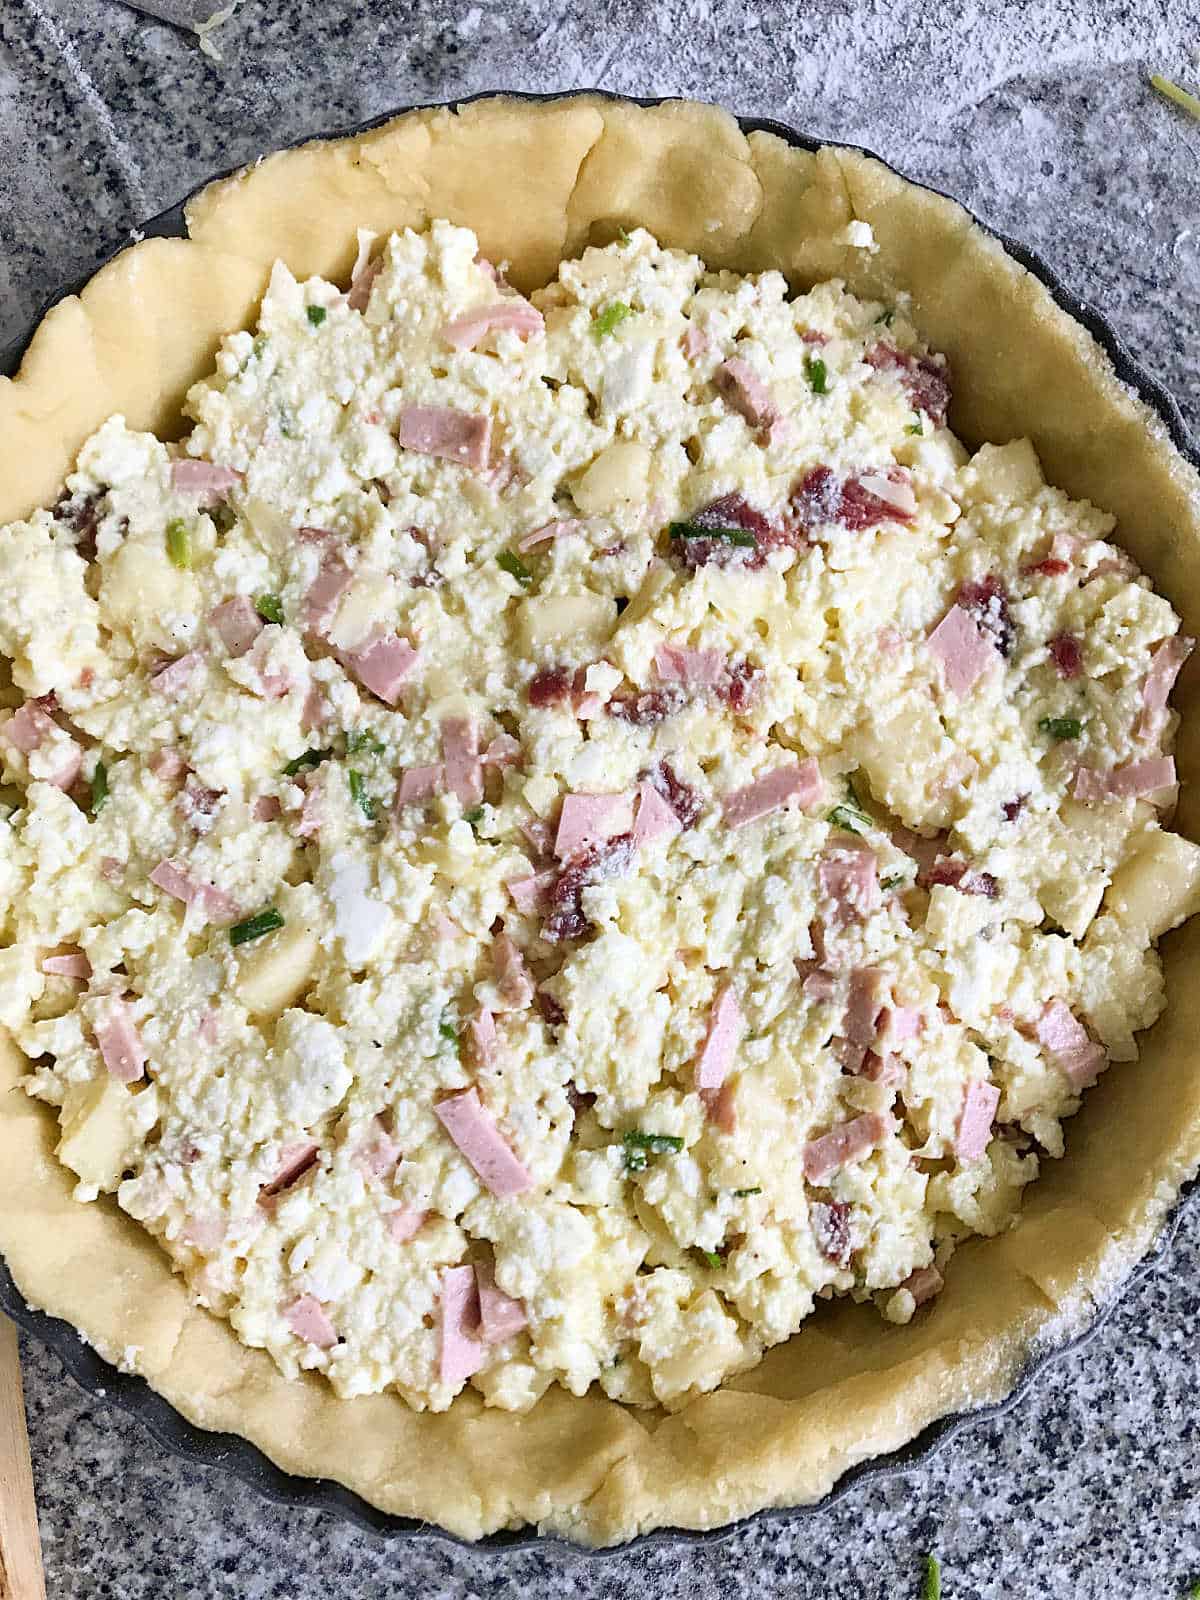 Round unbaked pie crust with ricotta, cold meats filling on a grey surface